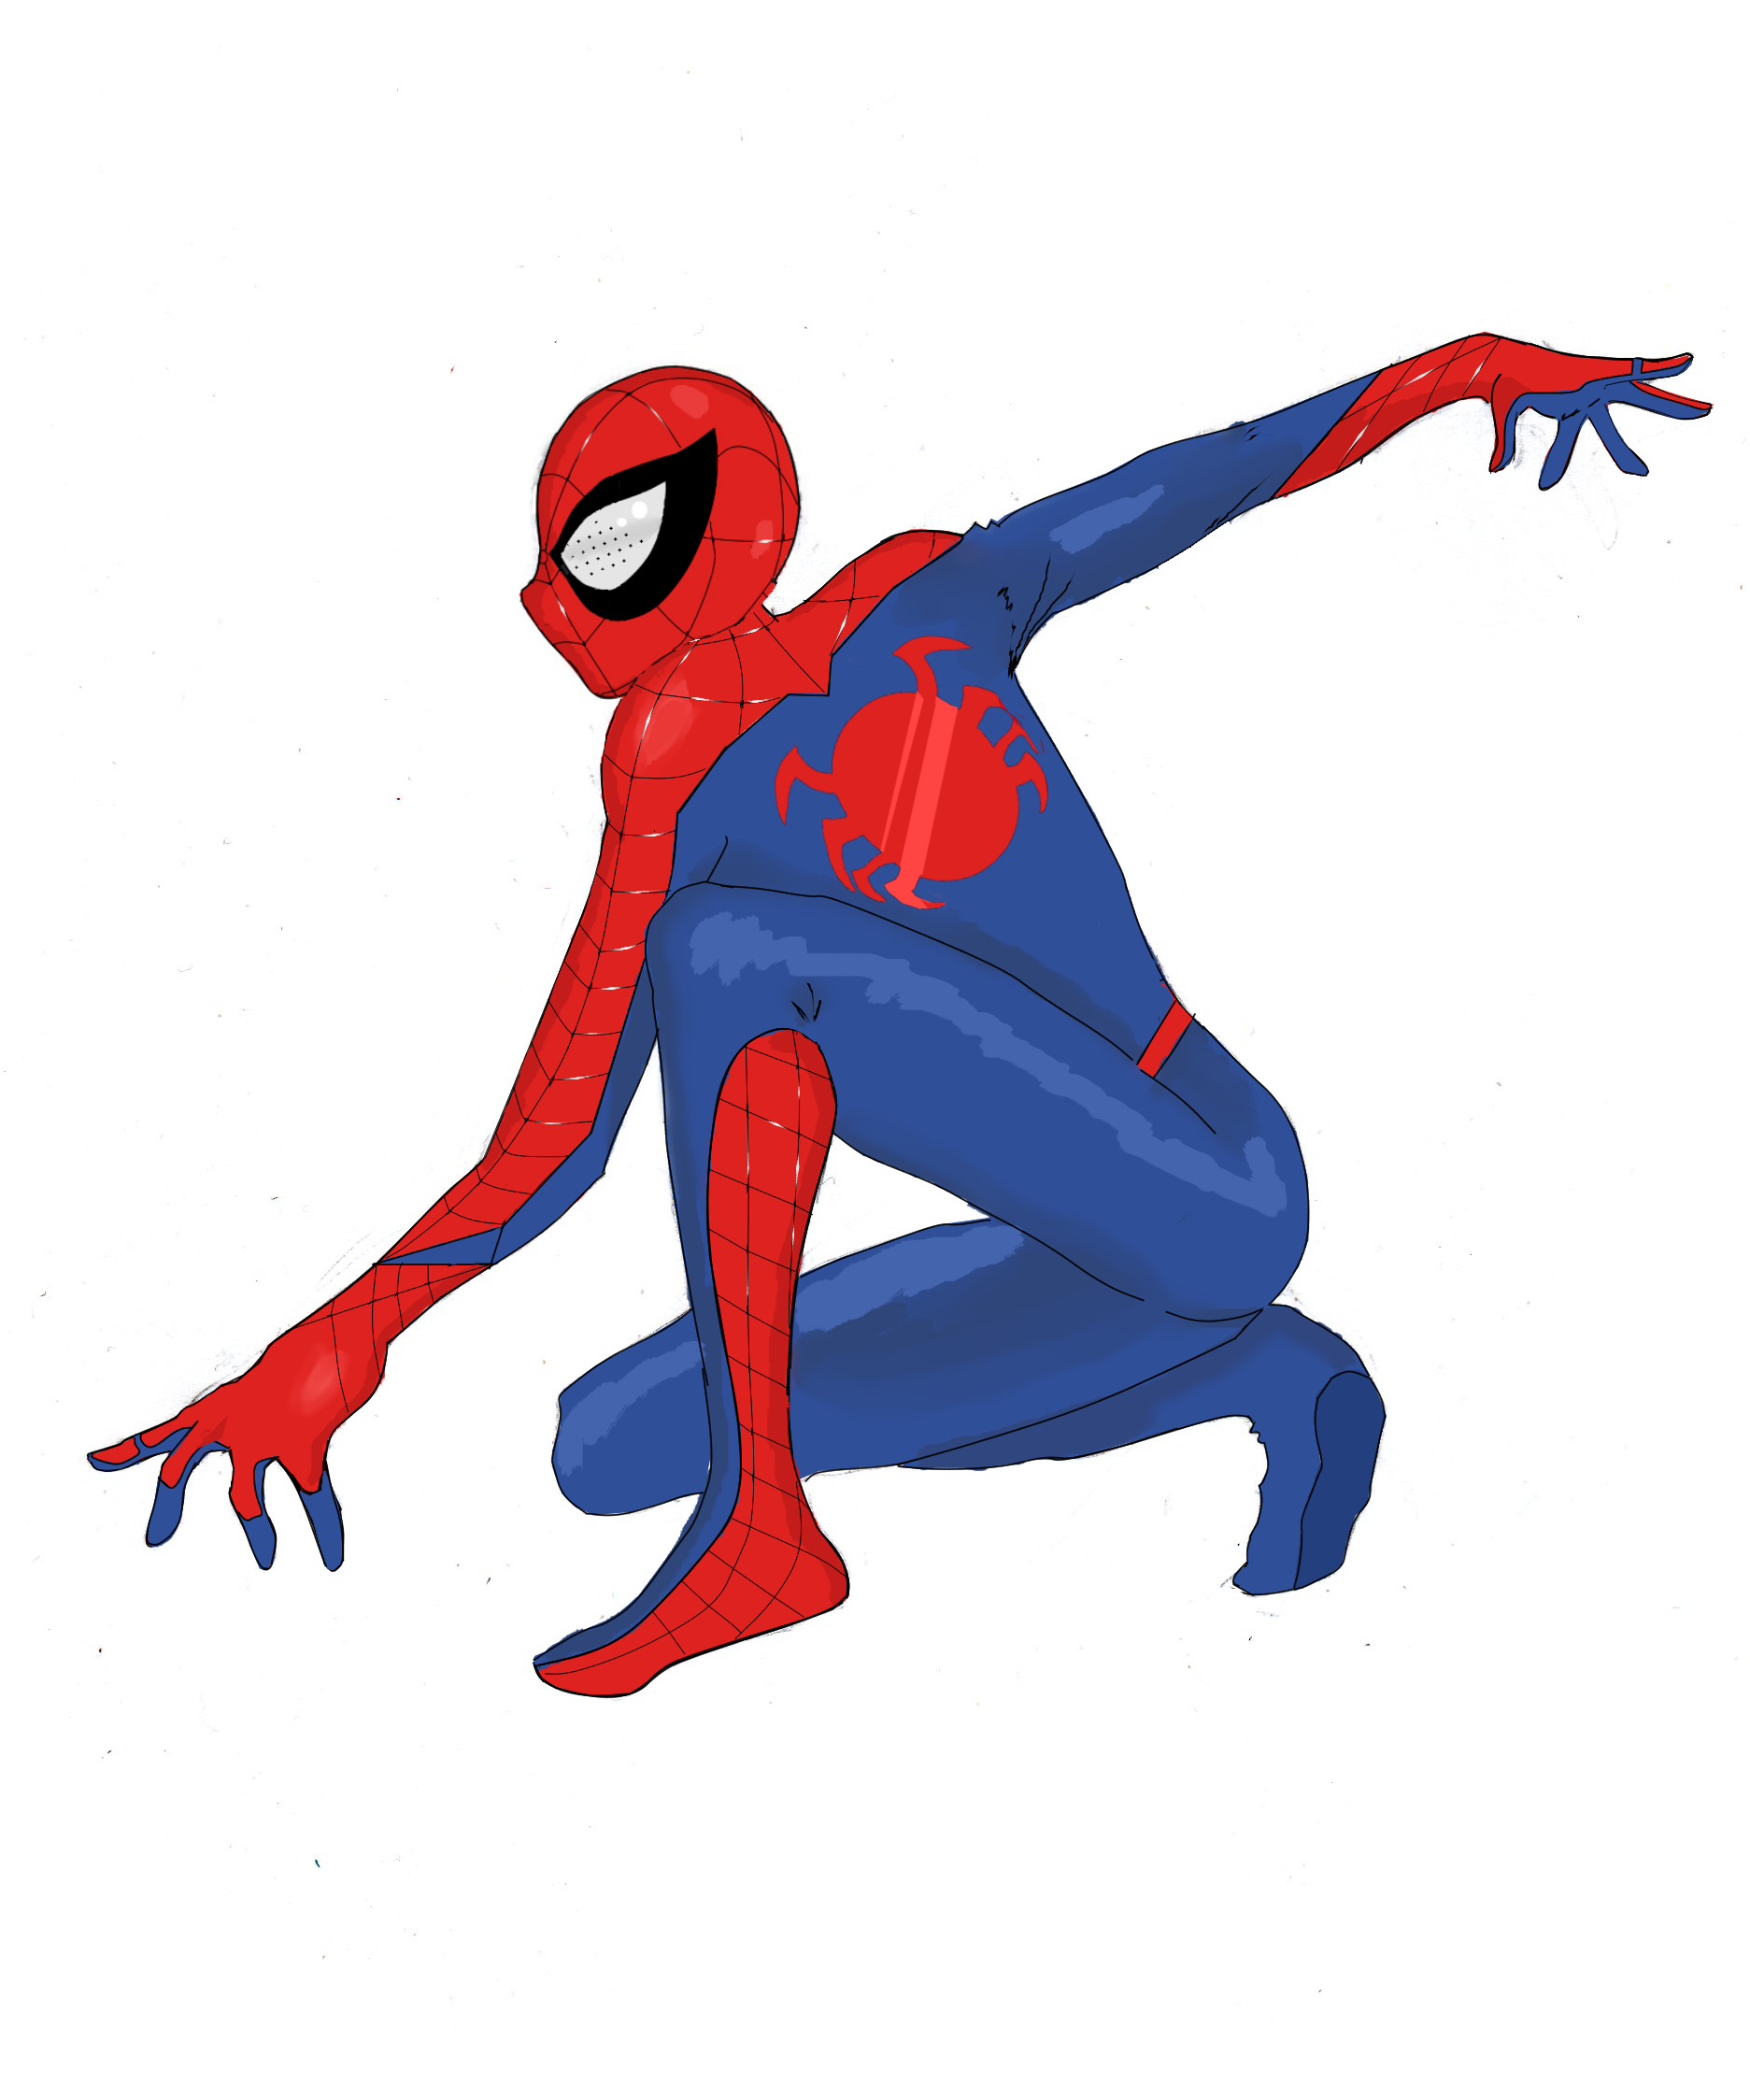 Does anyone know what the red part of the Spider-Man Advanced suit would be  made of in real life? I know the white part is carbon fiber and the blue  part would